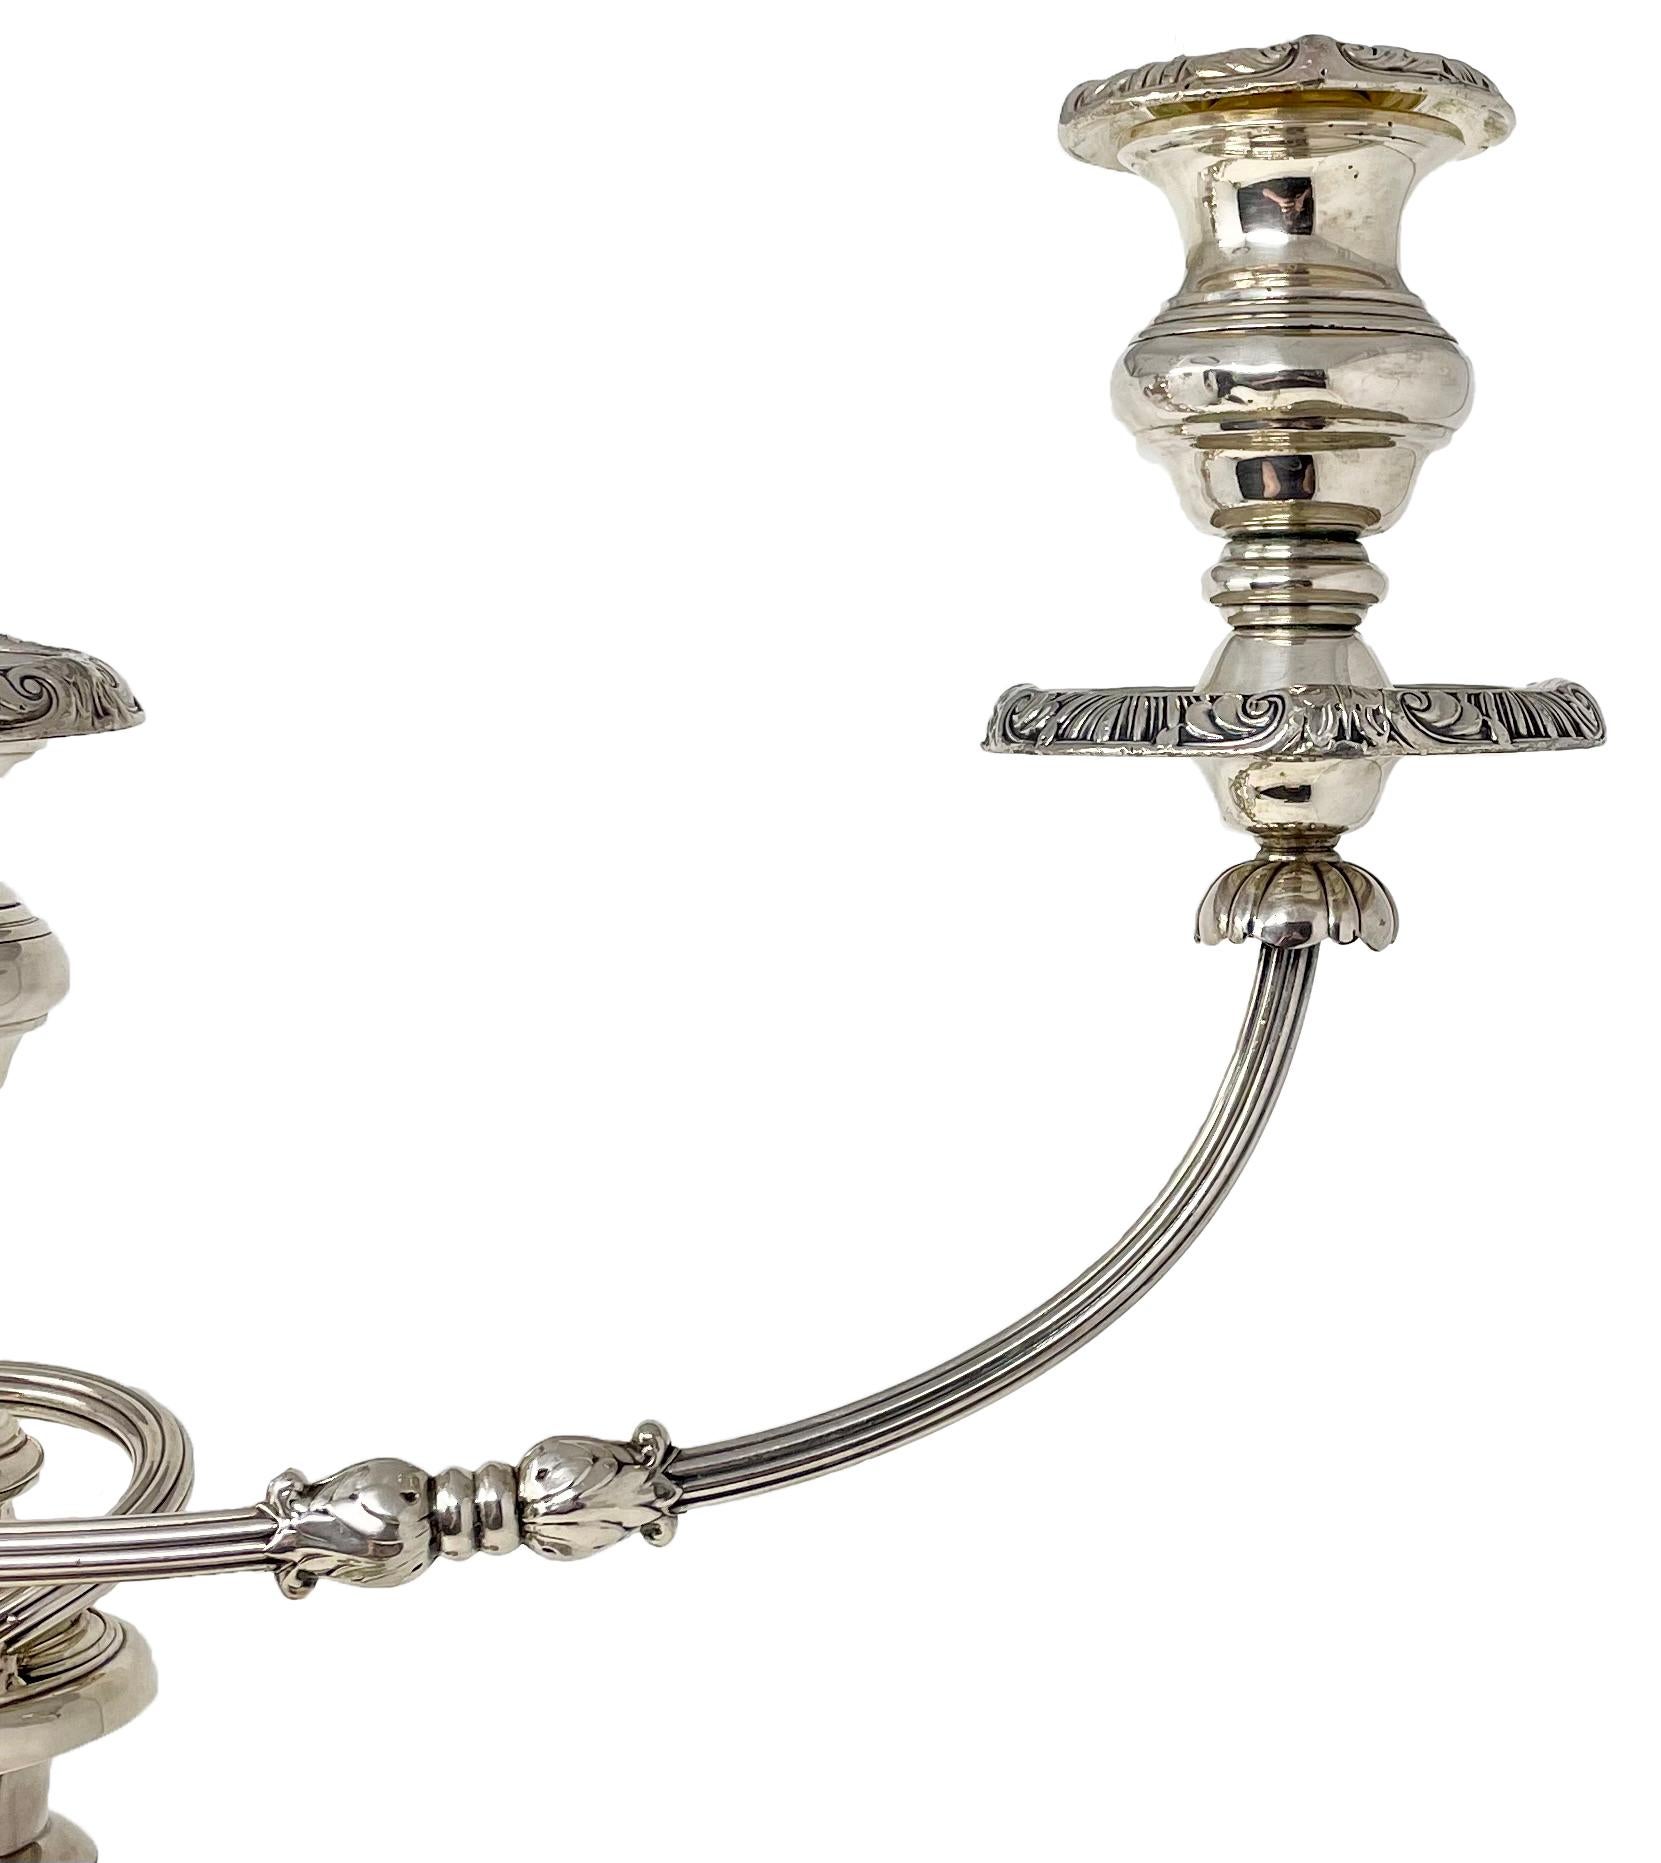 Sheffield Plate Pair Antique English Sheffield Silver-Plated Convertible Candelabra, Circa 1870. For Sale